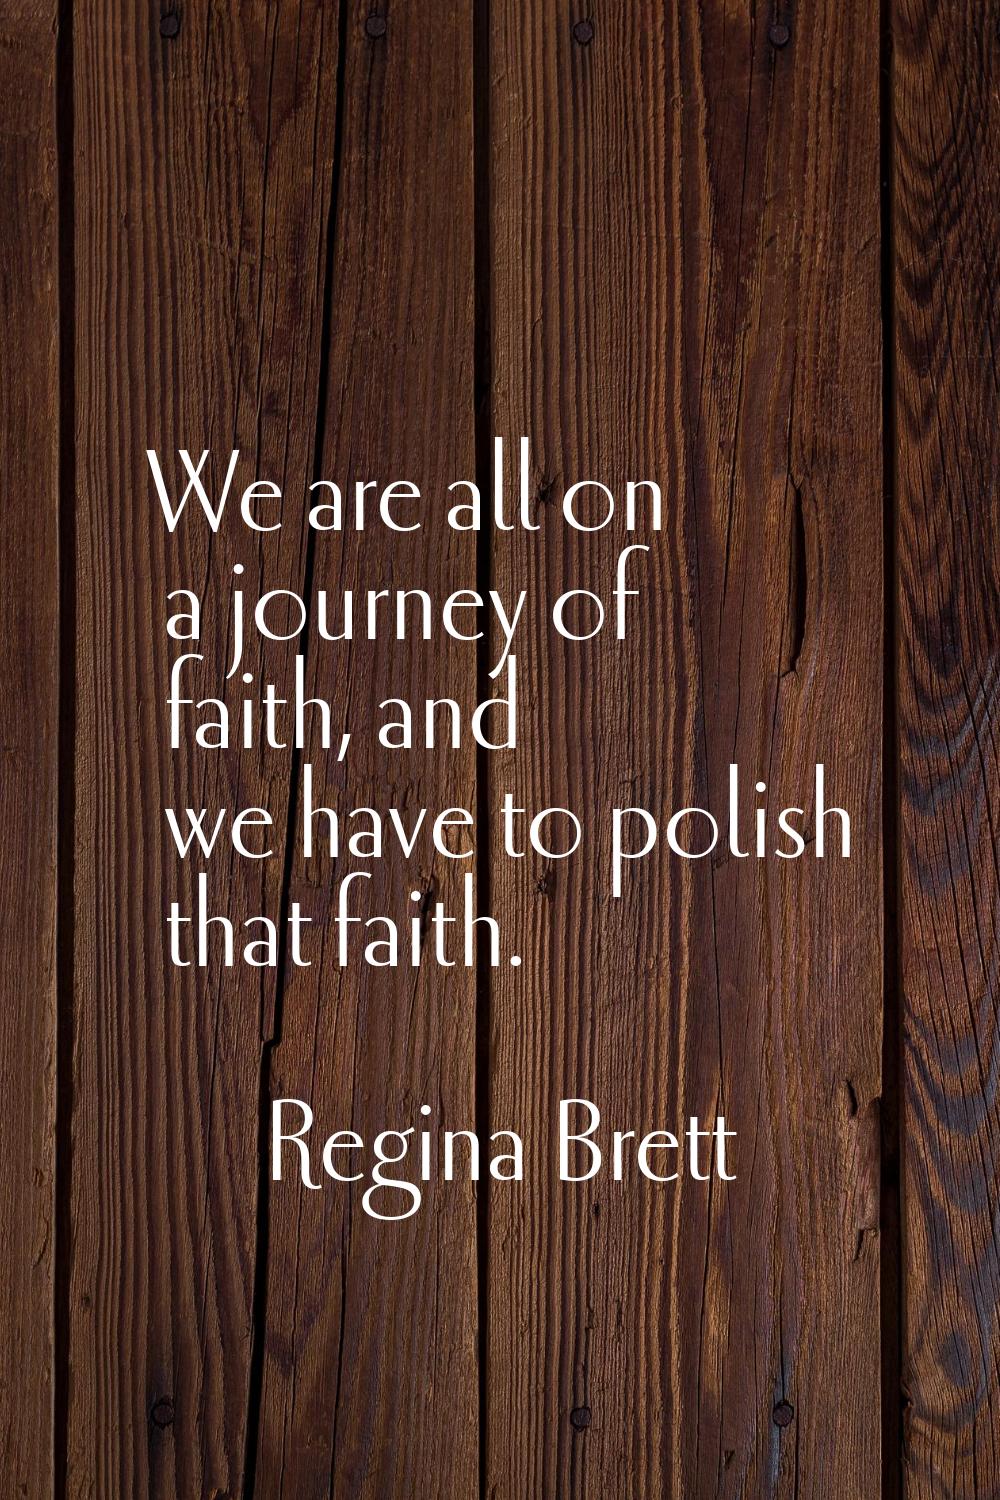 We are all on a journey of faith, and we have to polish that faith.